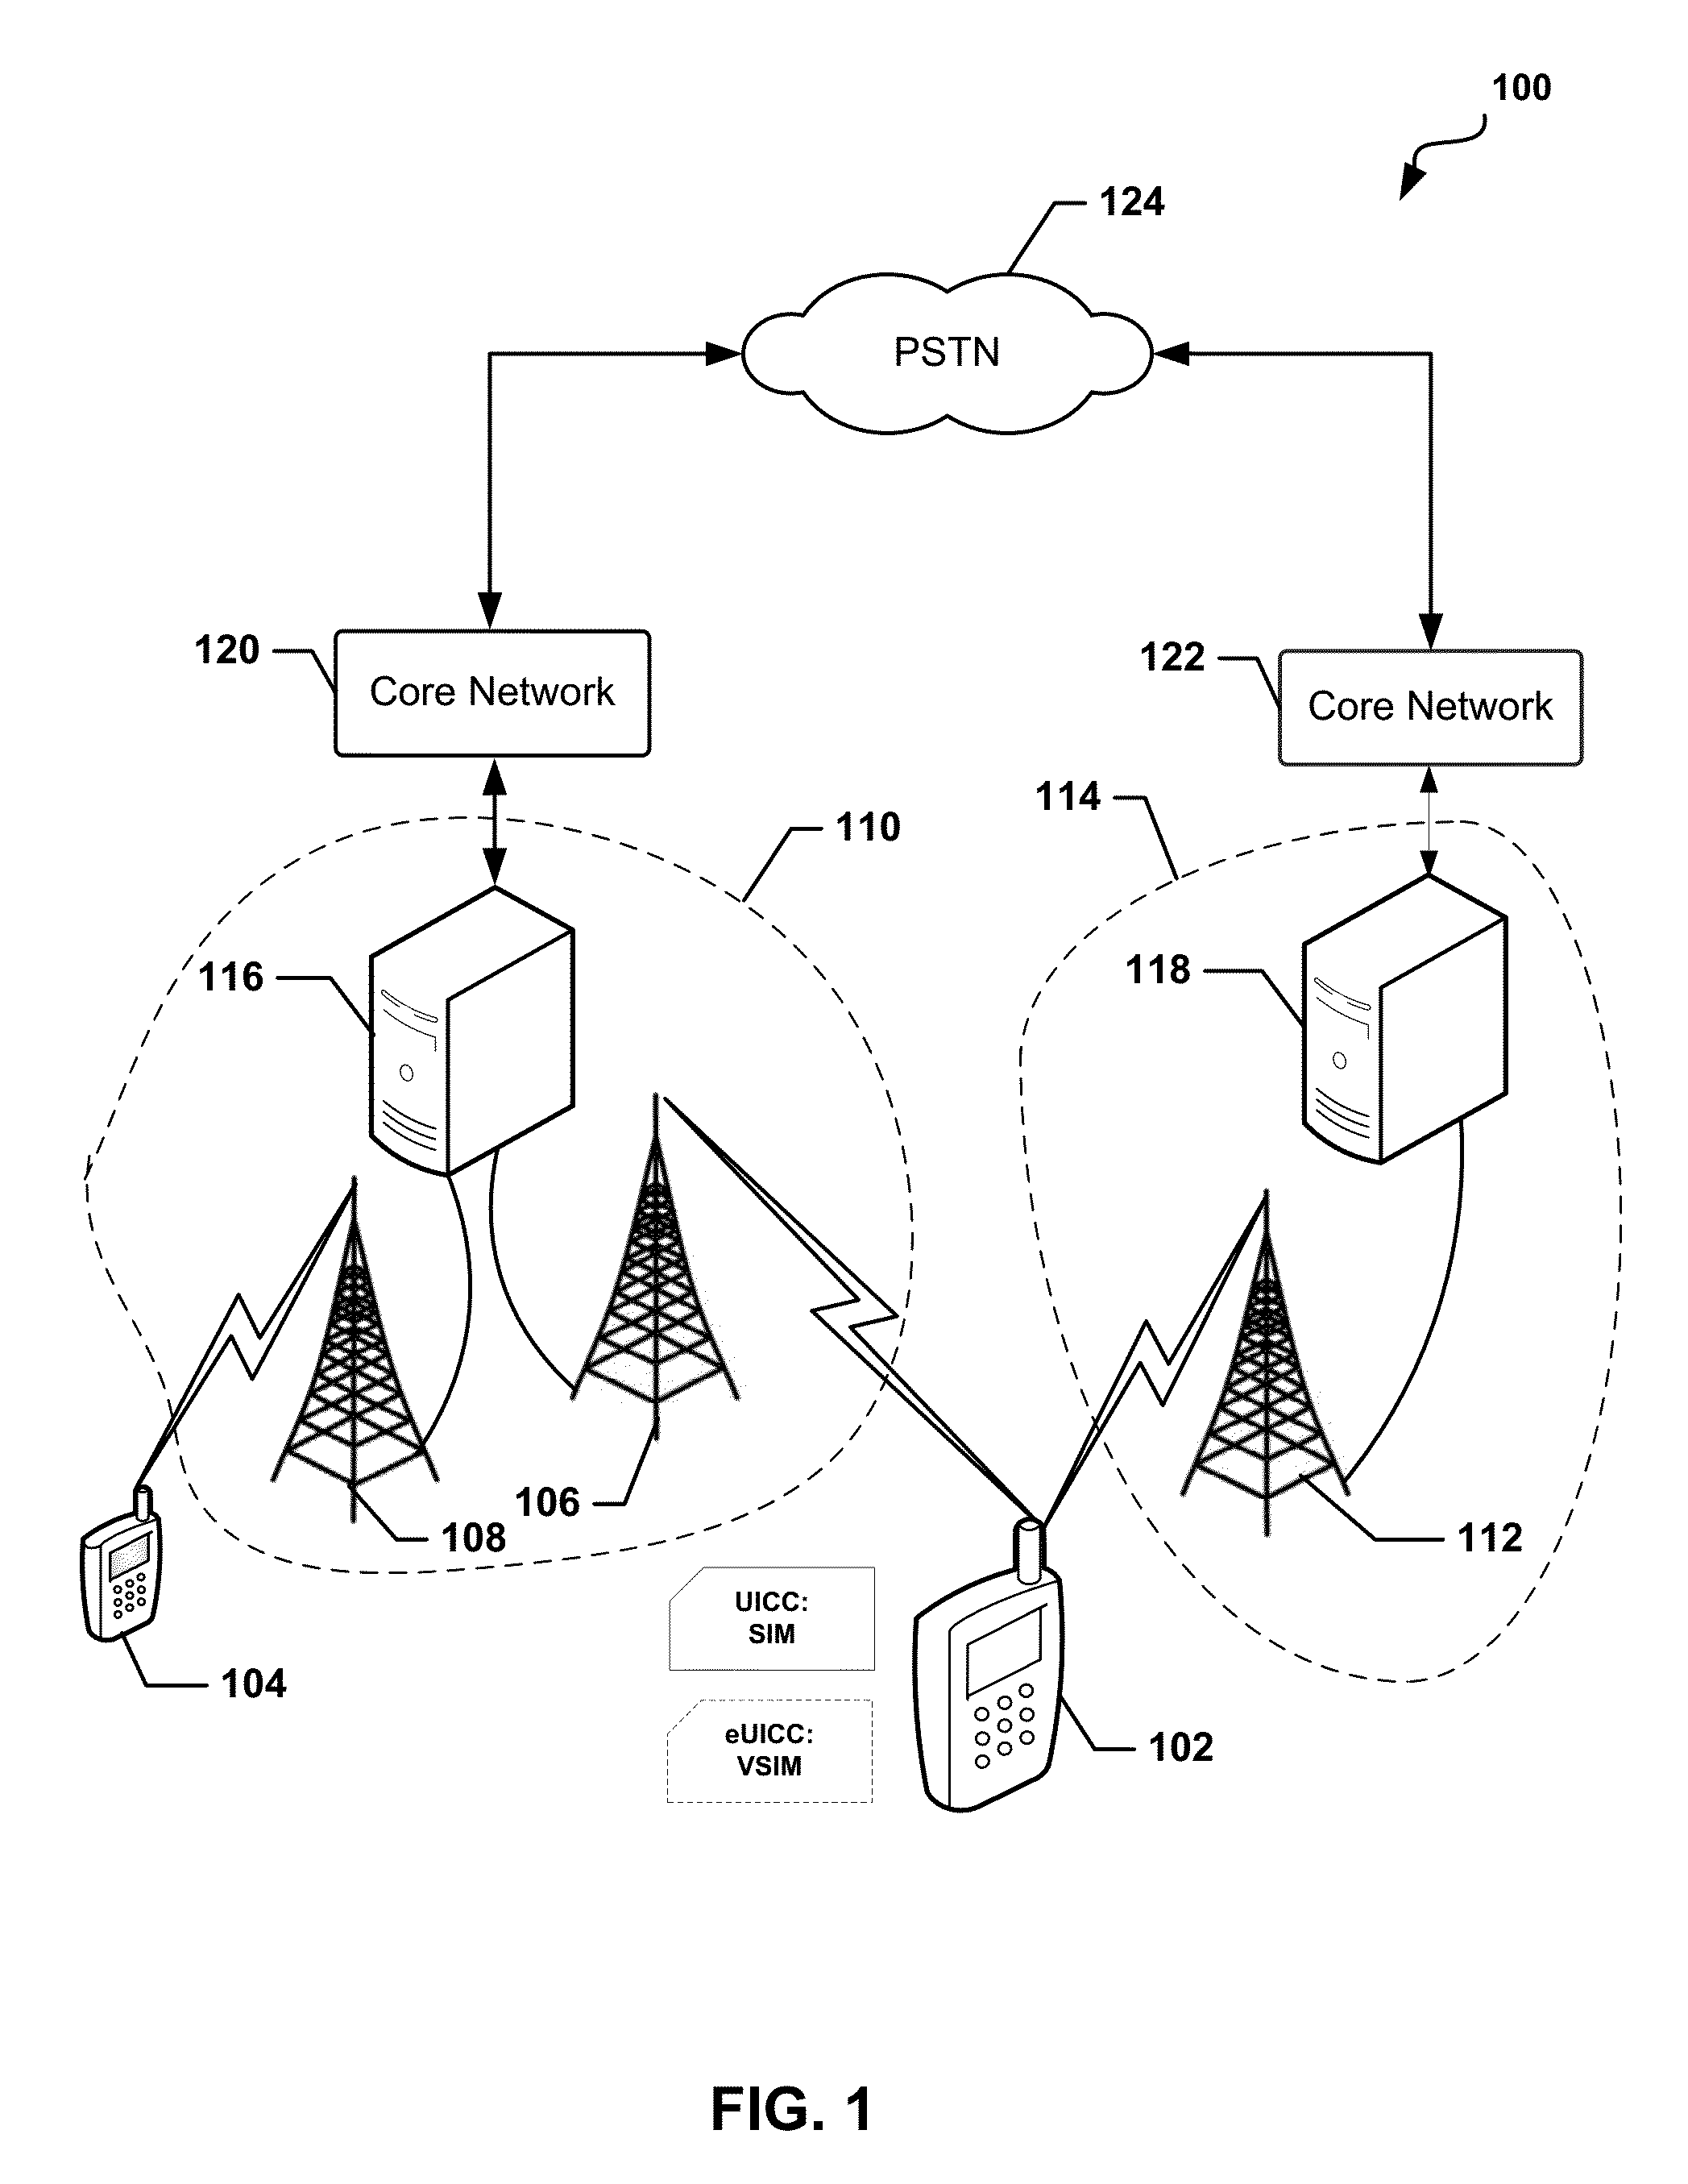 System and methods for dynamic SIM provisioning on a dual-SIM wireless communication device